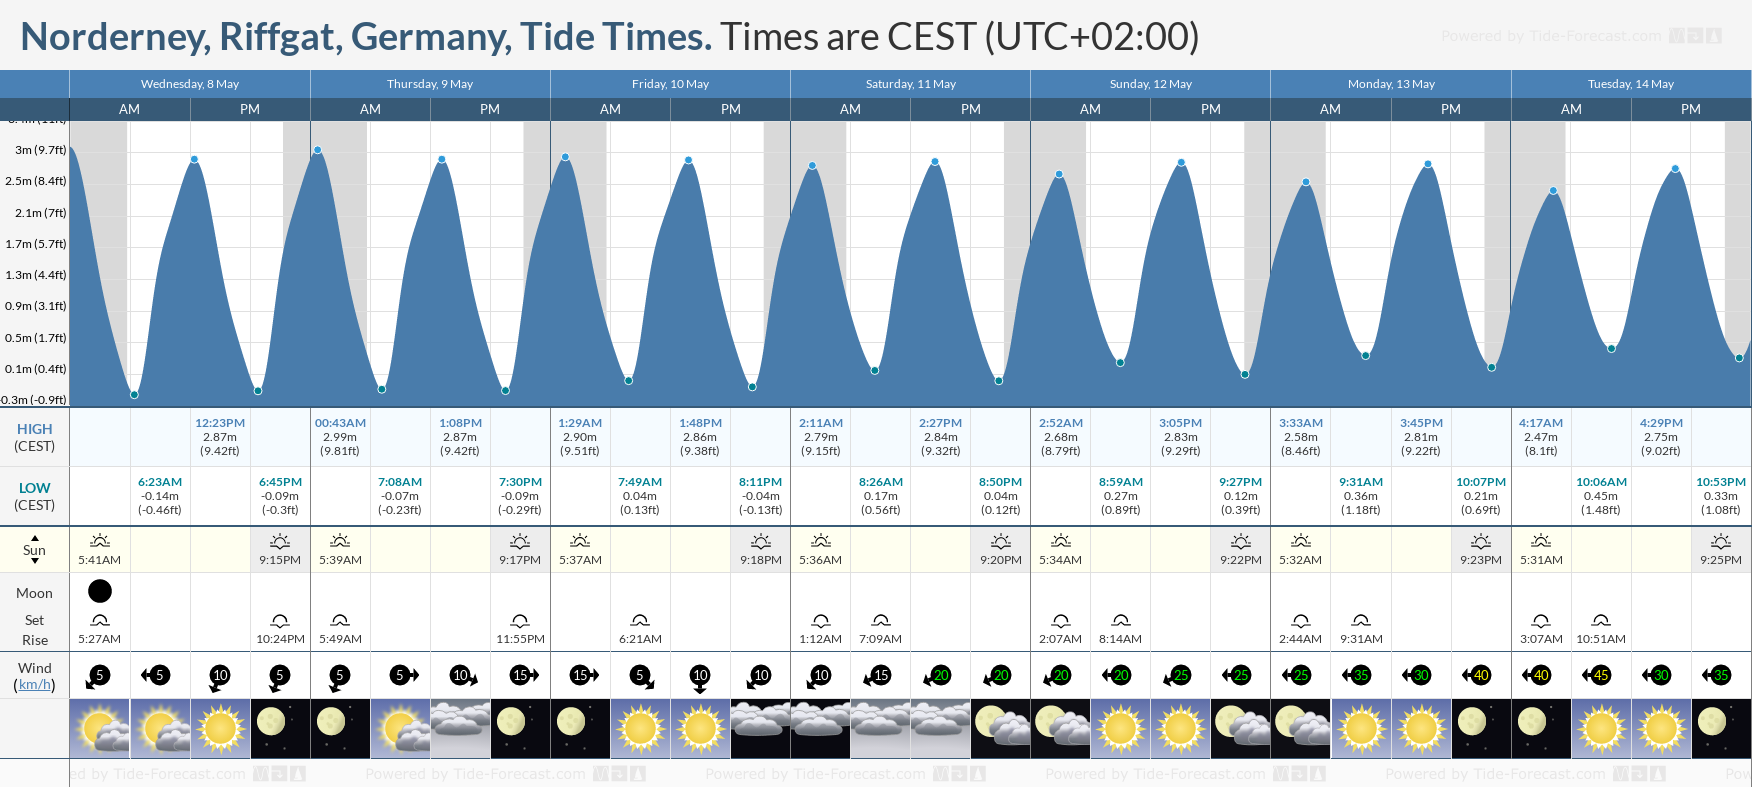 Norderney, Riffgat, Germany Tide Chart including high and low tide times for the next 7 days